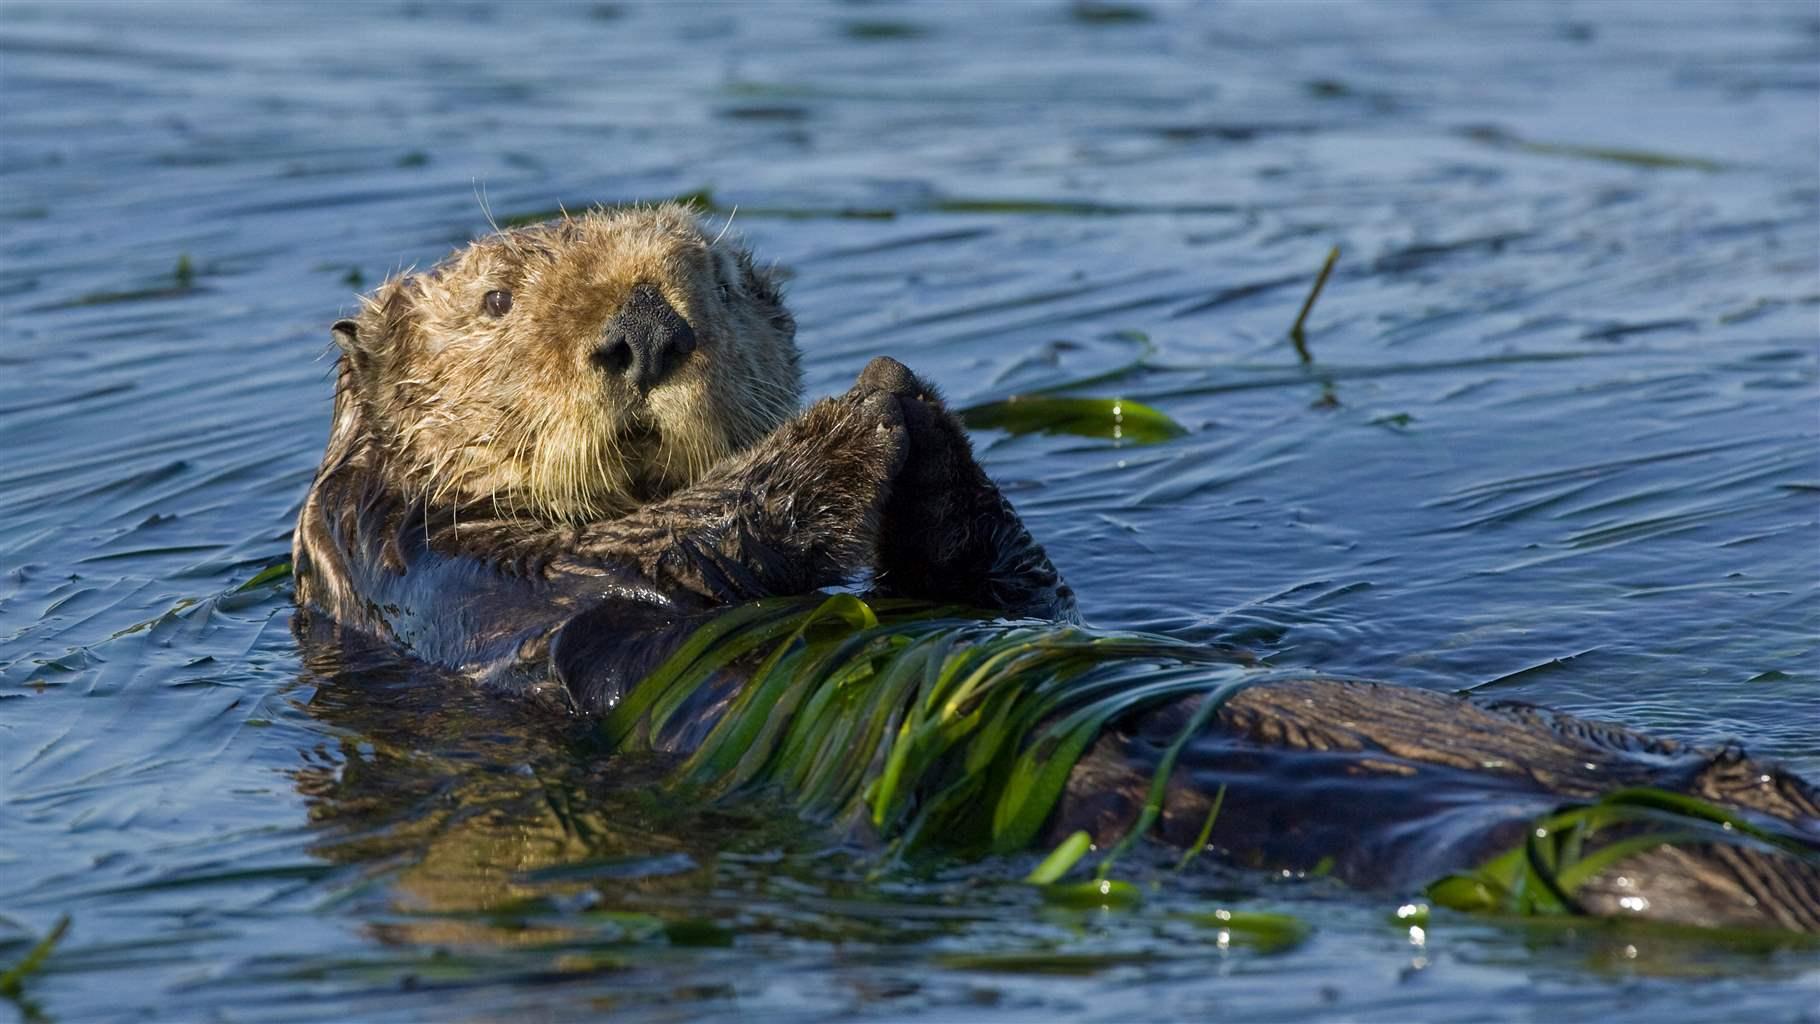 Sea Otter (Enhydra lutris) large male wrapped up in eelgrass, Monterey Bay, California